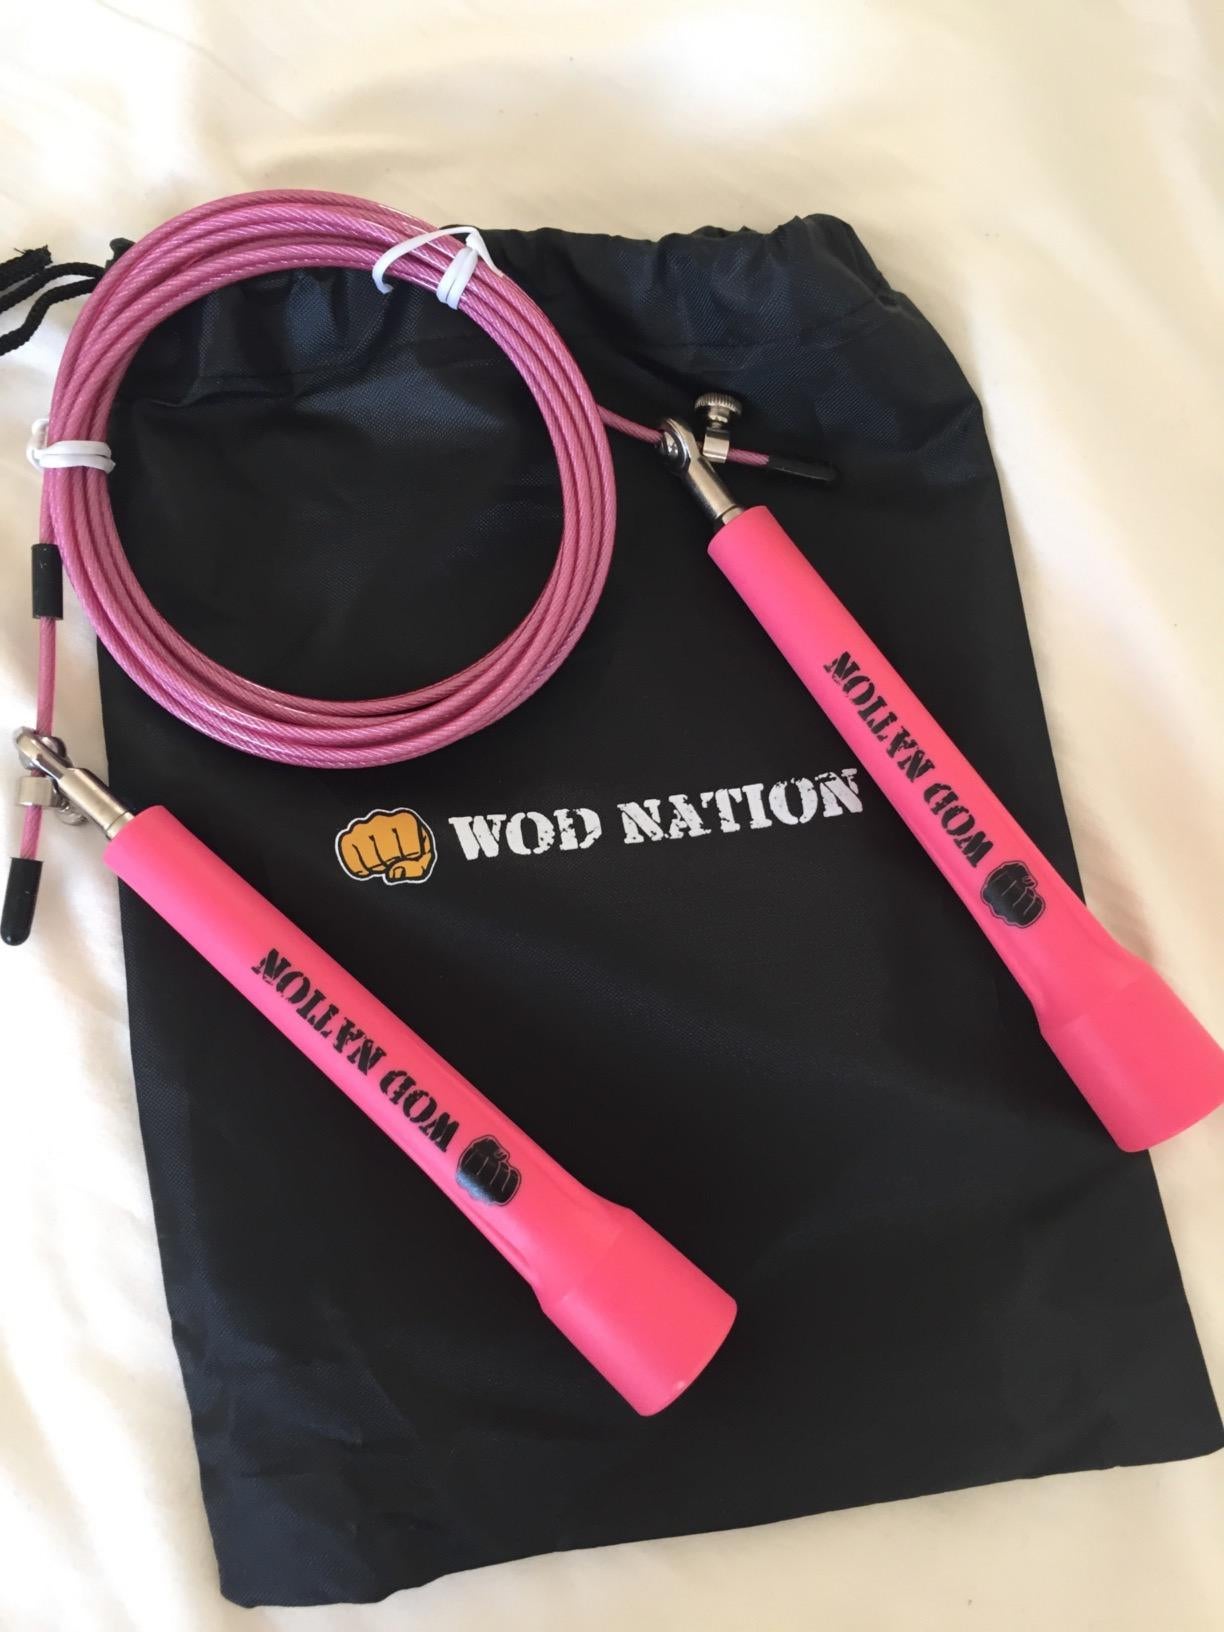 a review photo of the jumprope in pink with a carrying bag